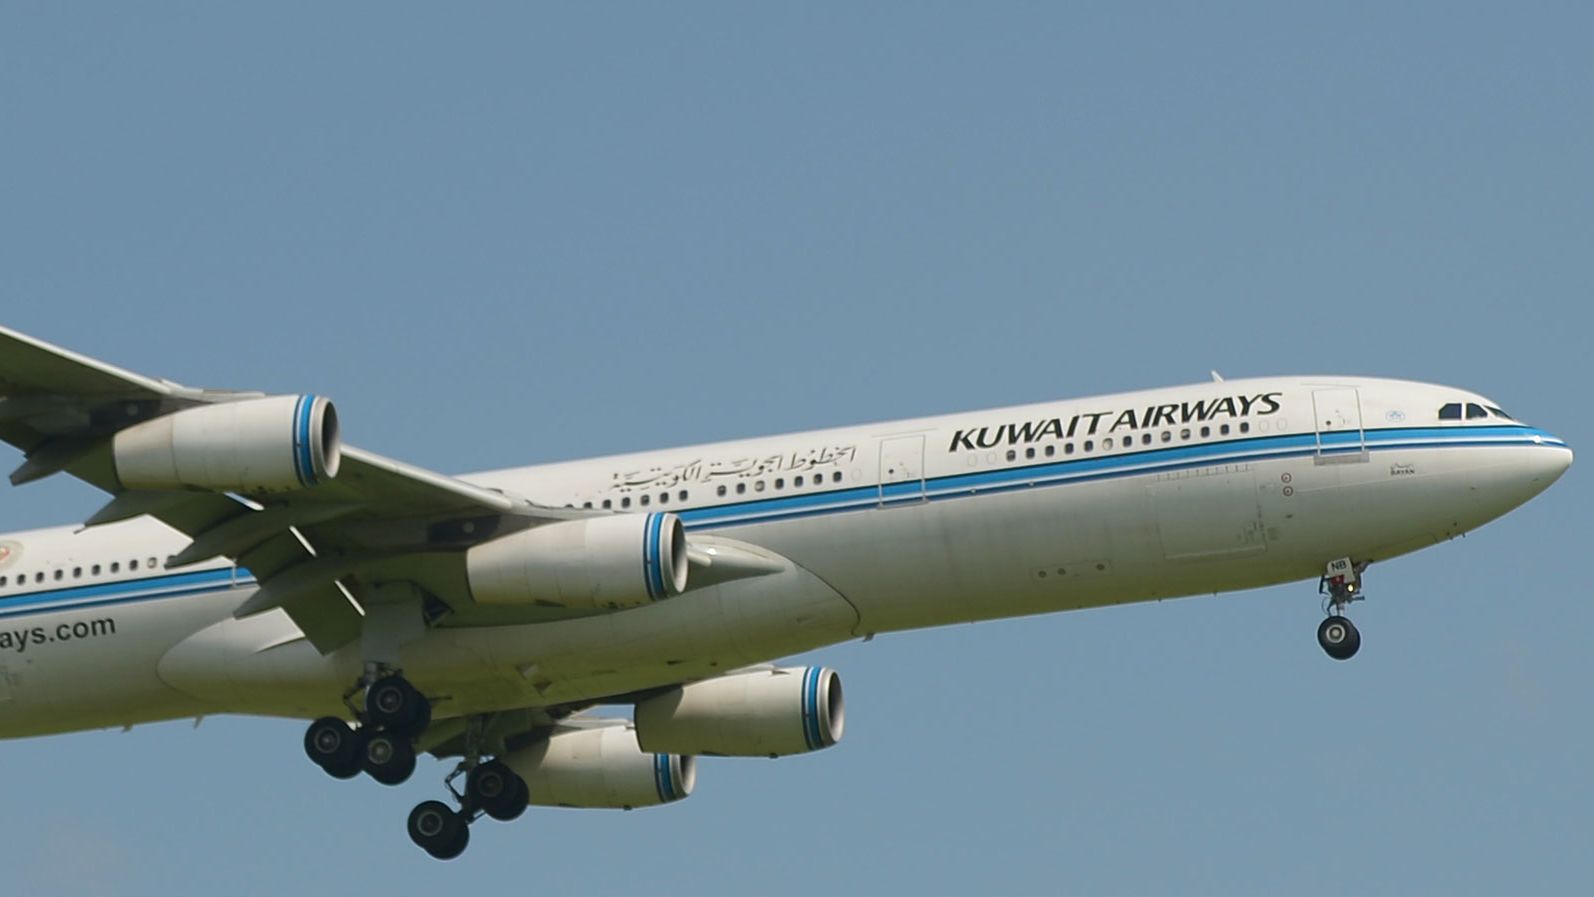 Kuwait Airways says it's not permitted to do business with Israel or Israelis under Kuwaiti law.